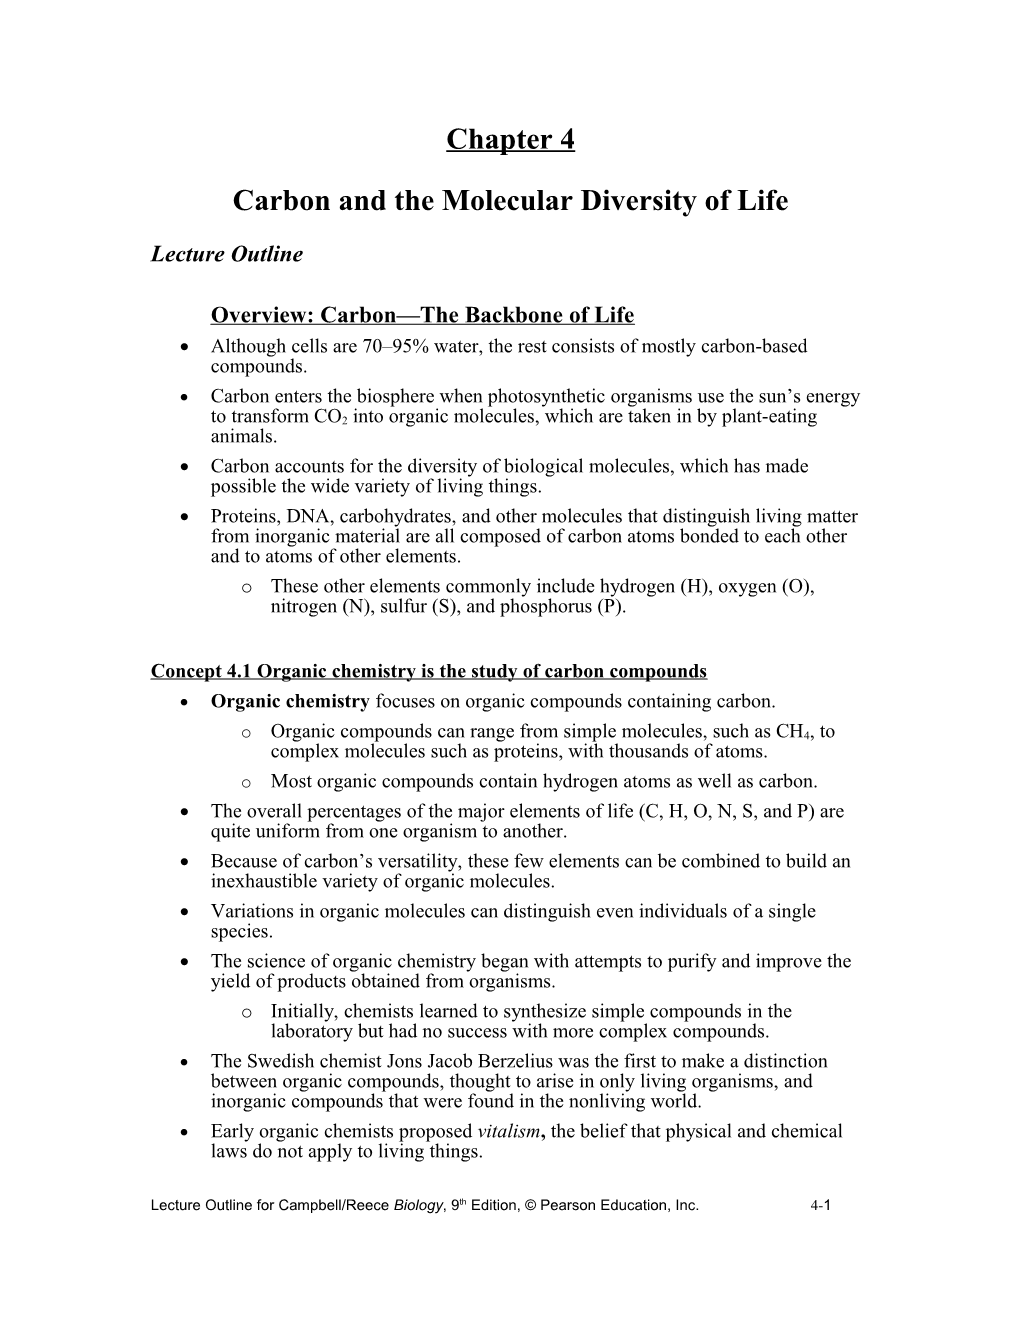 Chapter 4 Carbon and the Molecular Diversity of Life